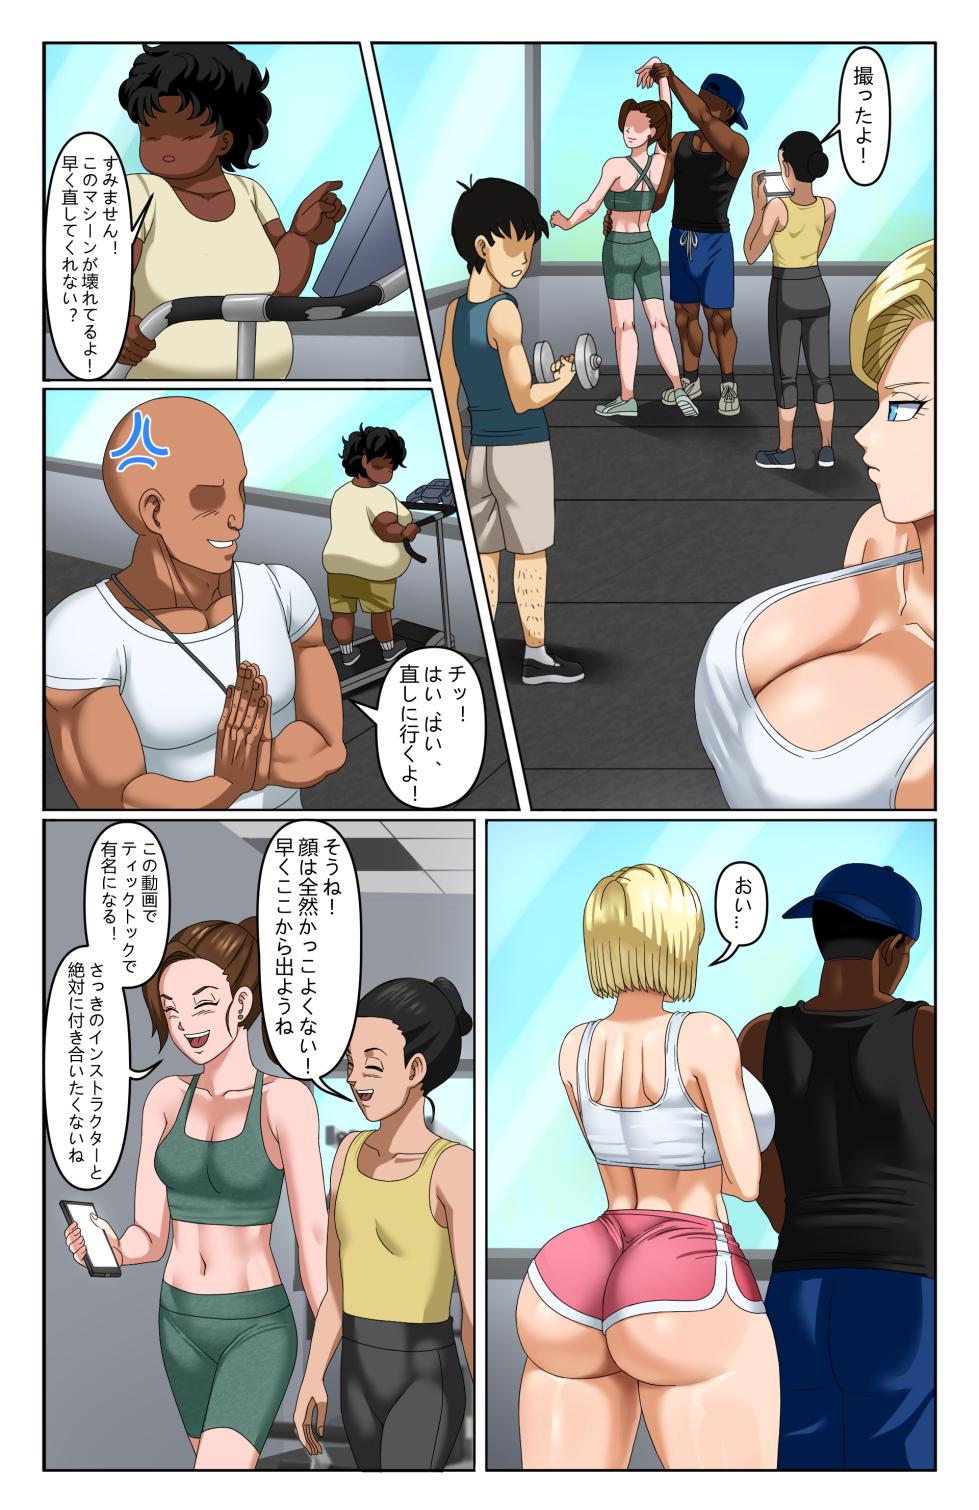 [Pink Pawg] Android 18 NTR 3 (Dragon Ball Super) - Page 5